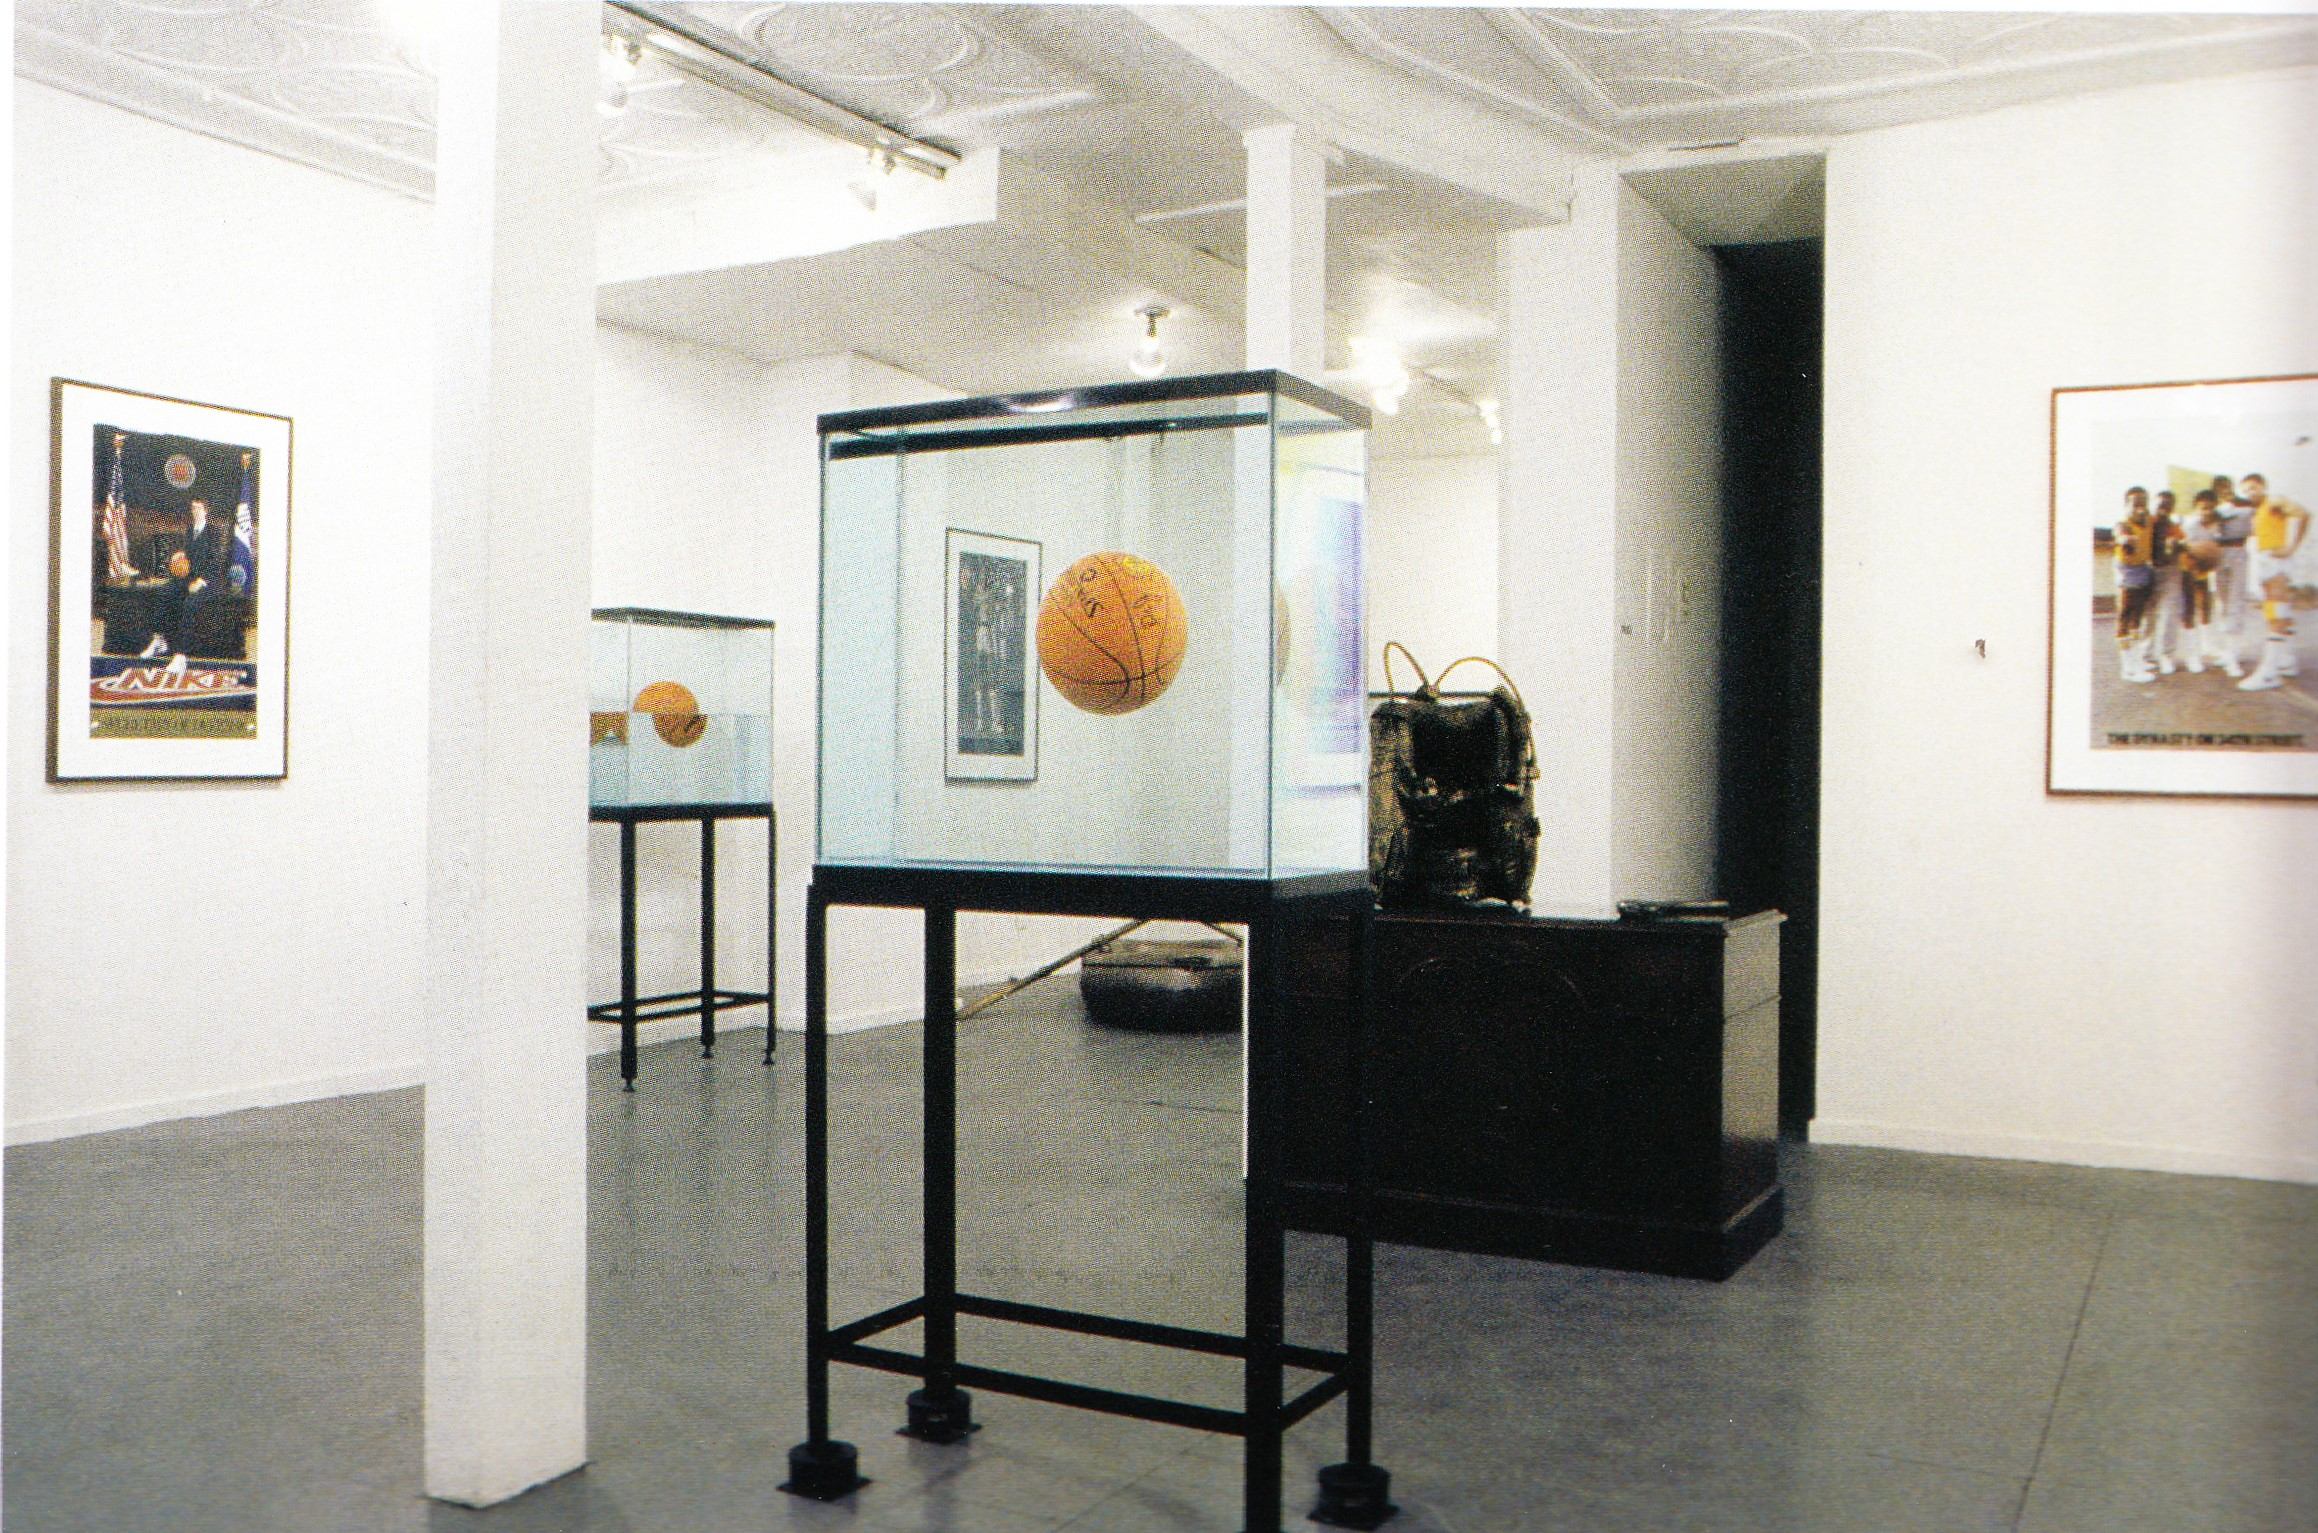 From the exhibition Equilibrium, Internazonal With Monument Gallery, New York, 1985, source: Jeff Koons, Taschen, 2010, p. 148.